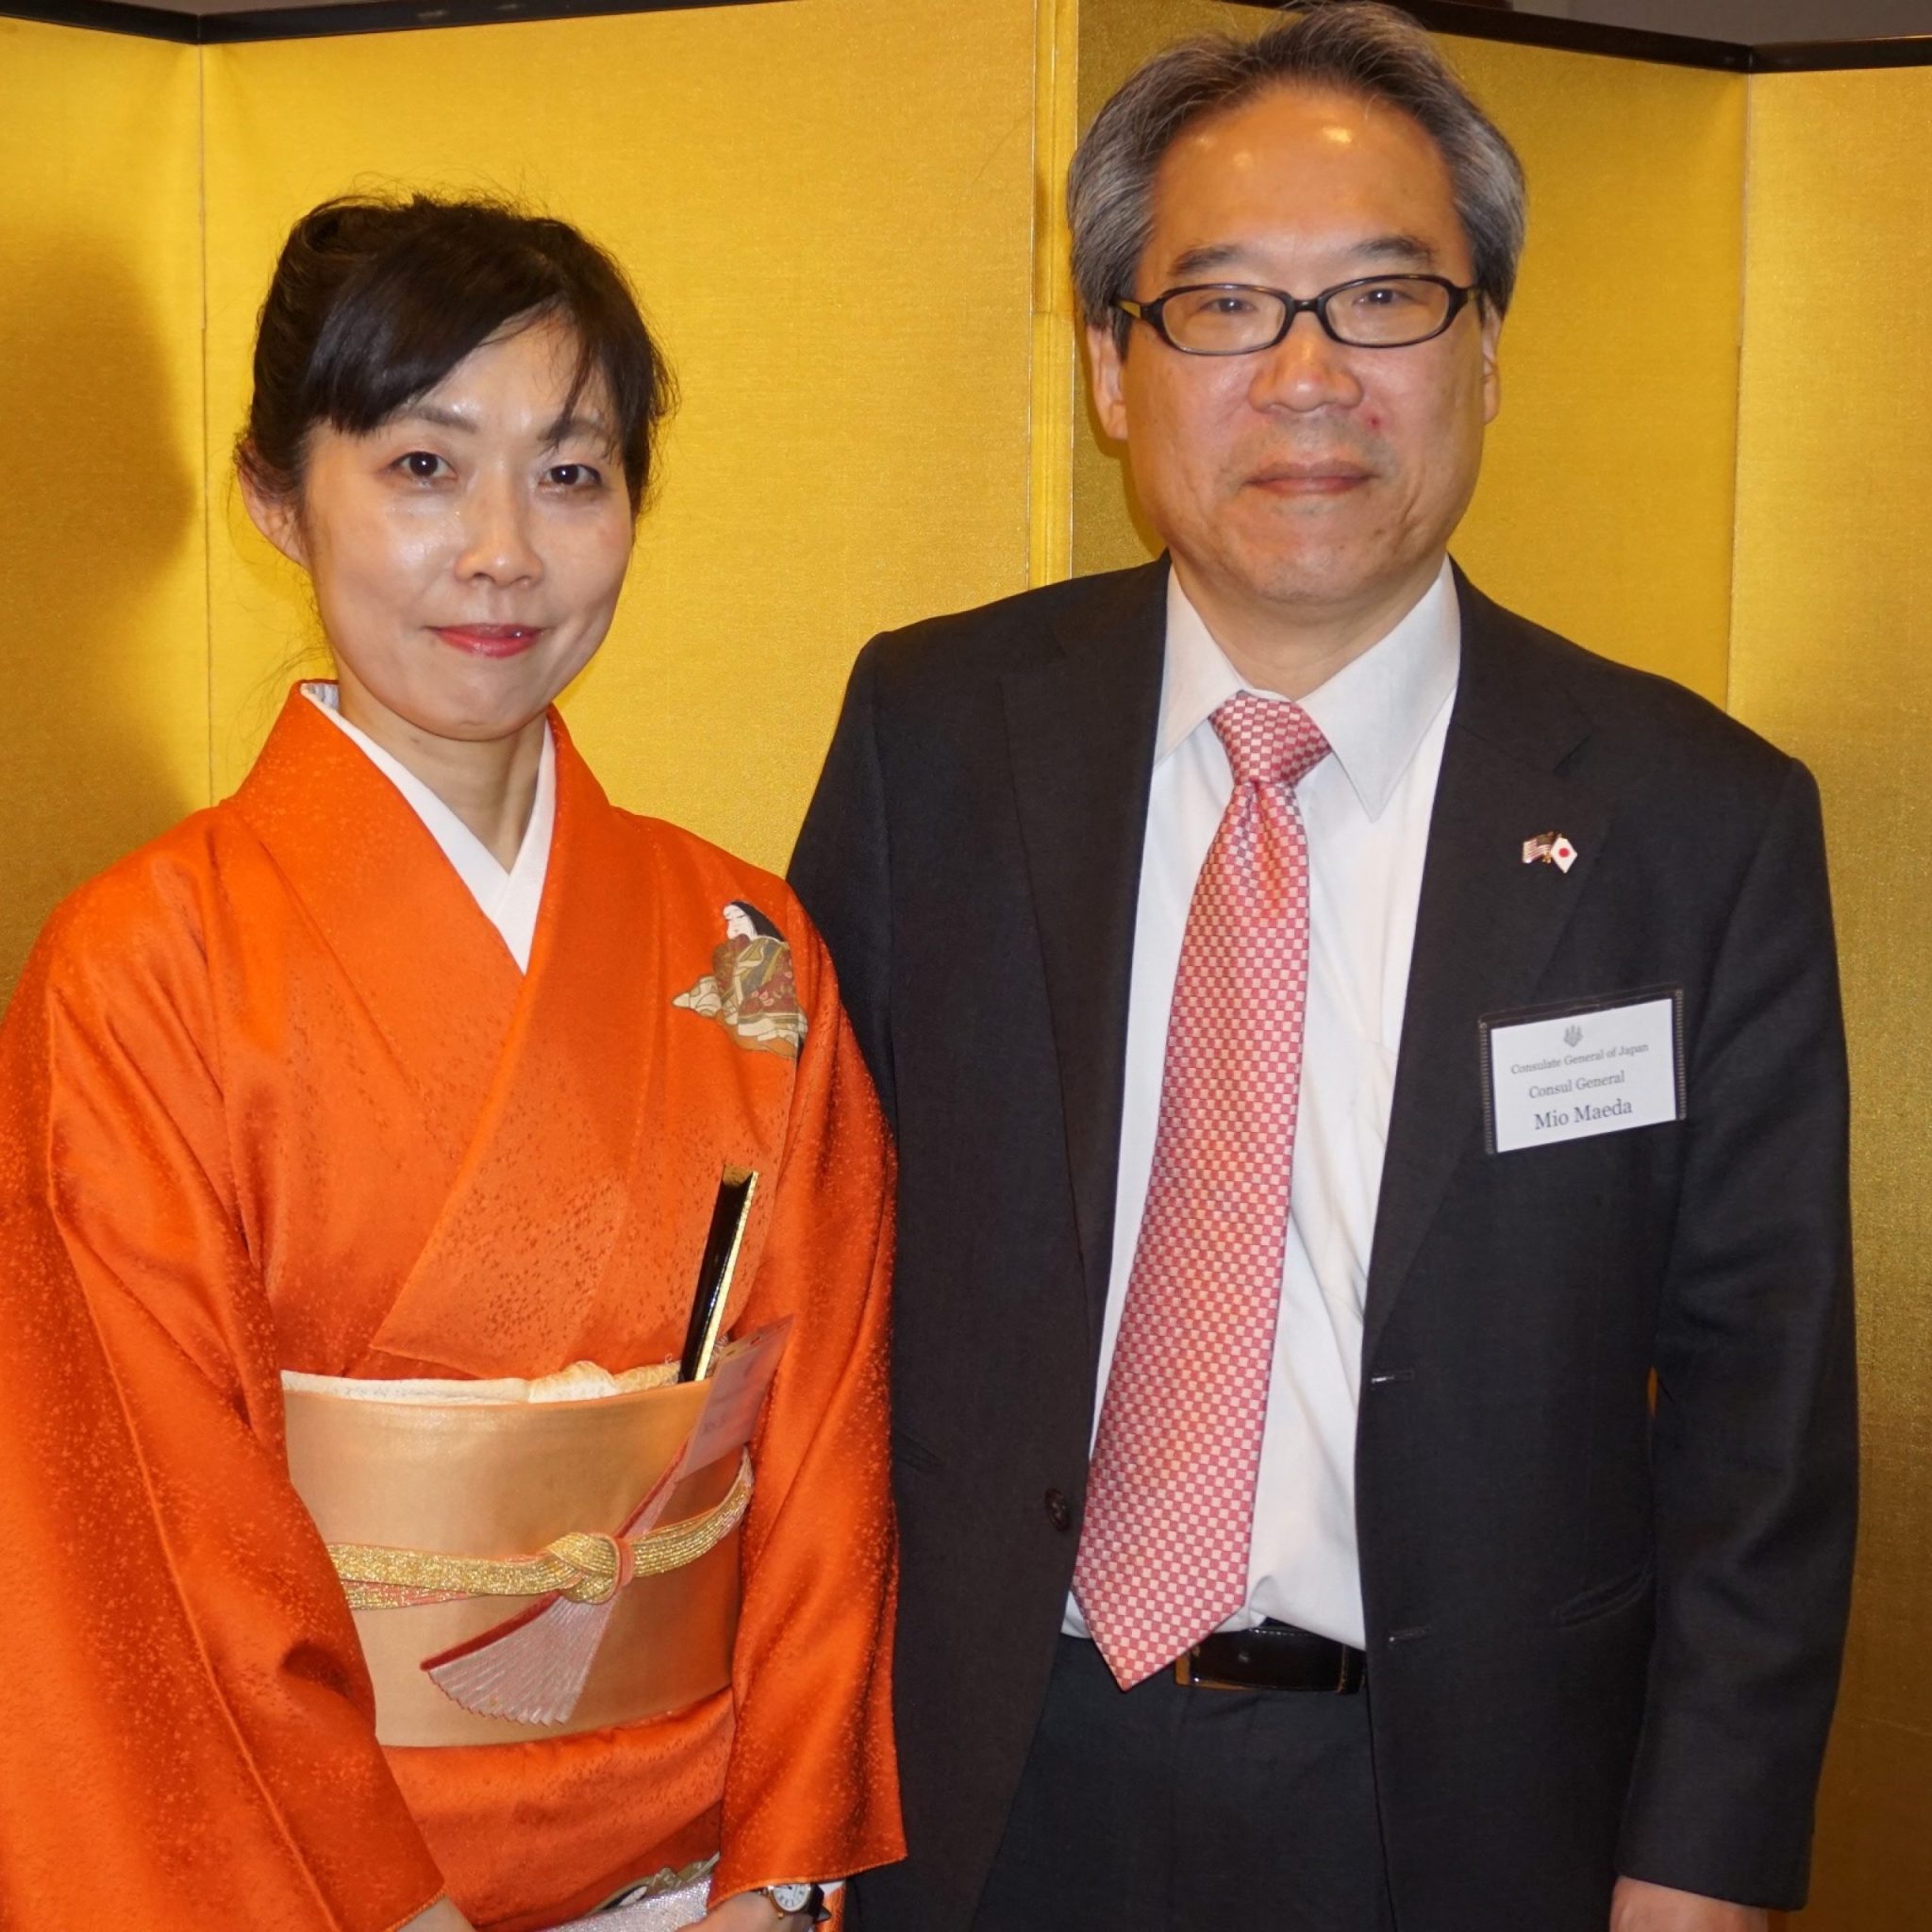 Summer in Japan is a - Consulate General of Japan in Miami